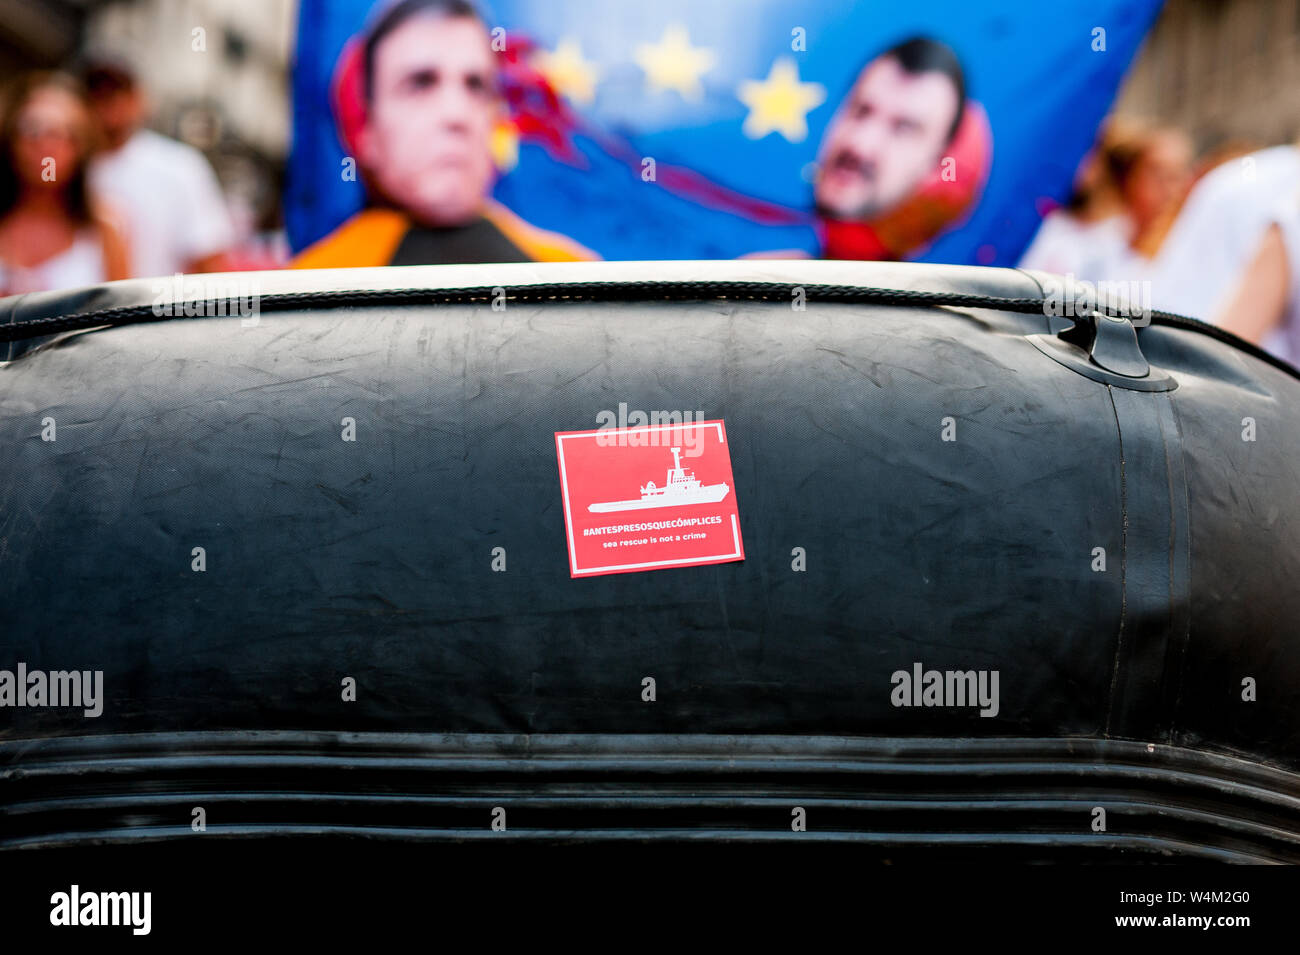 proactiva open arms ngo sticker on rubber dinghy boat during public protest against italian far right politics and politicians against immigration in Stock Photo